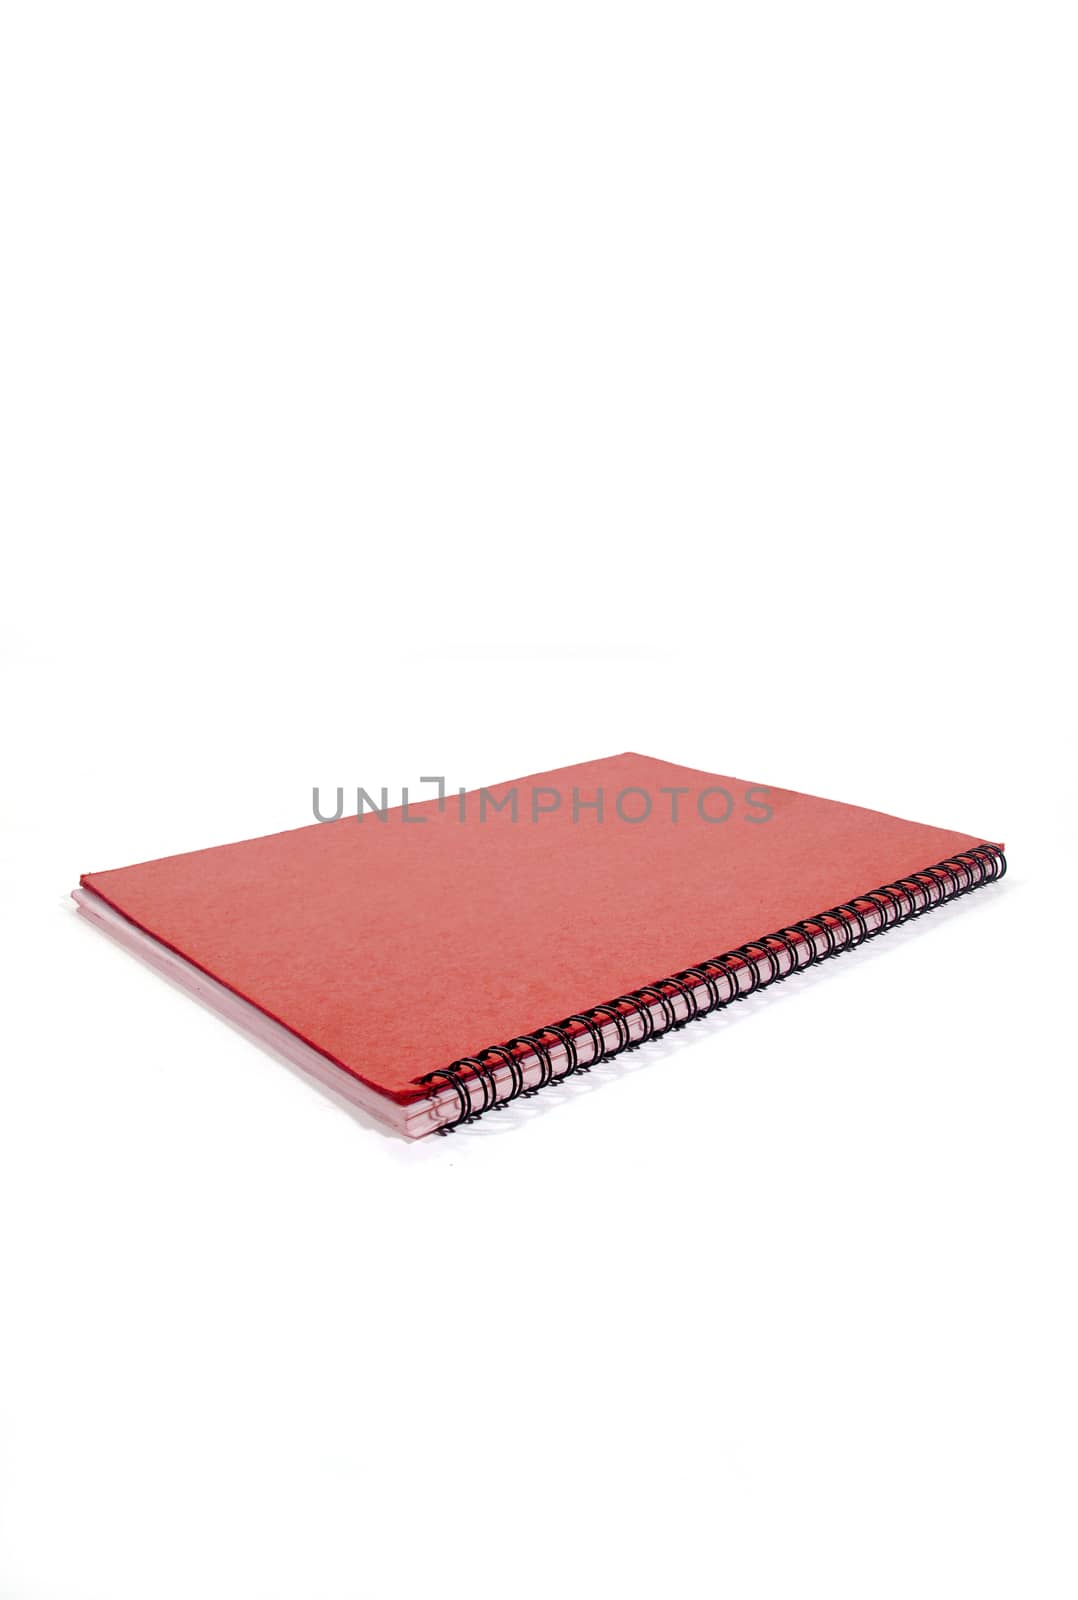 Red notebook. by thitimontoyai